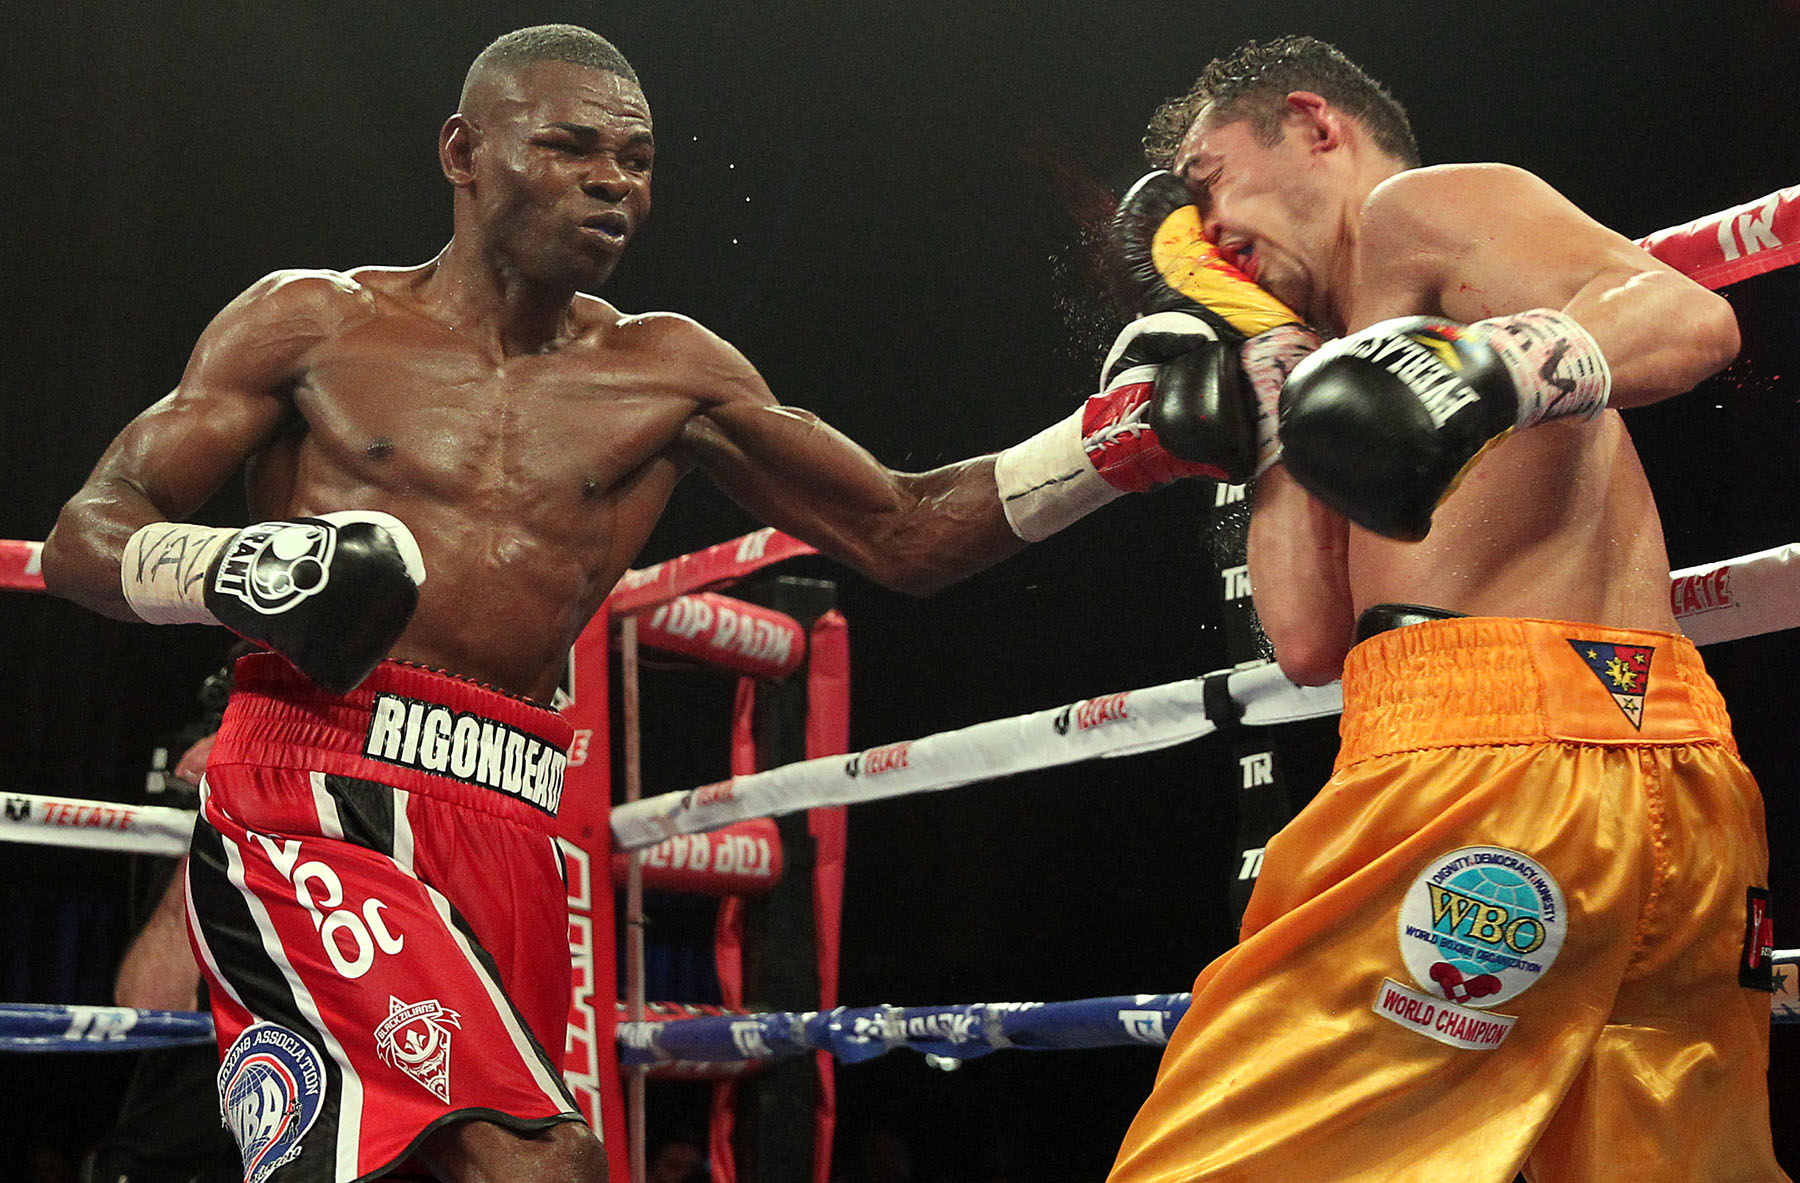 Controlling Distance and Minimalism: Analyzing Wladimir Klitschko and Guillermo Rigondeaux